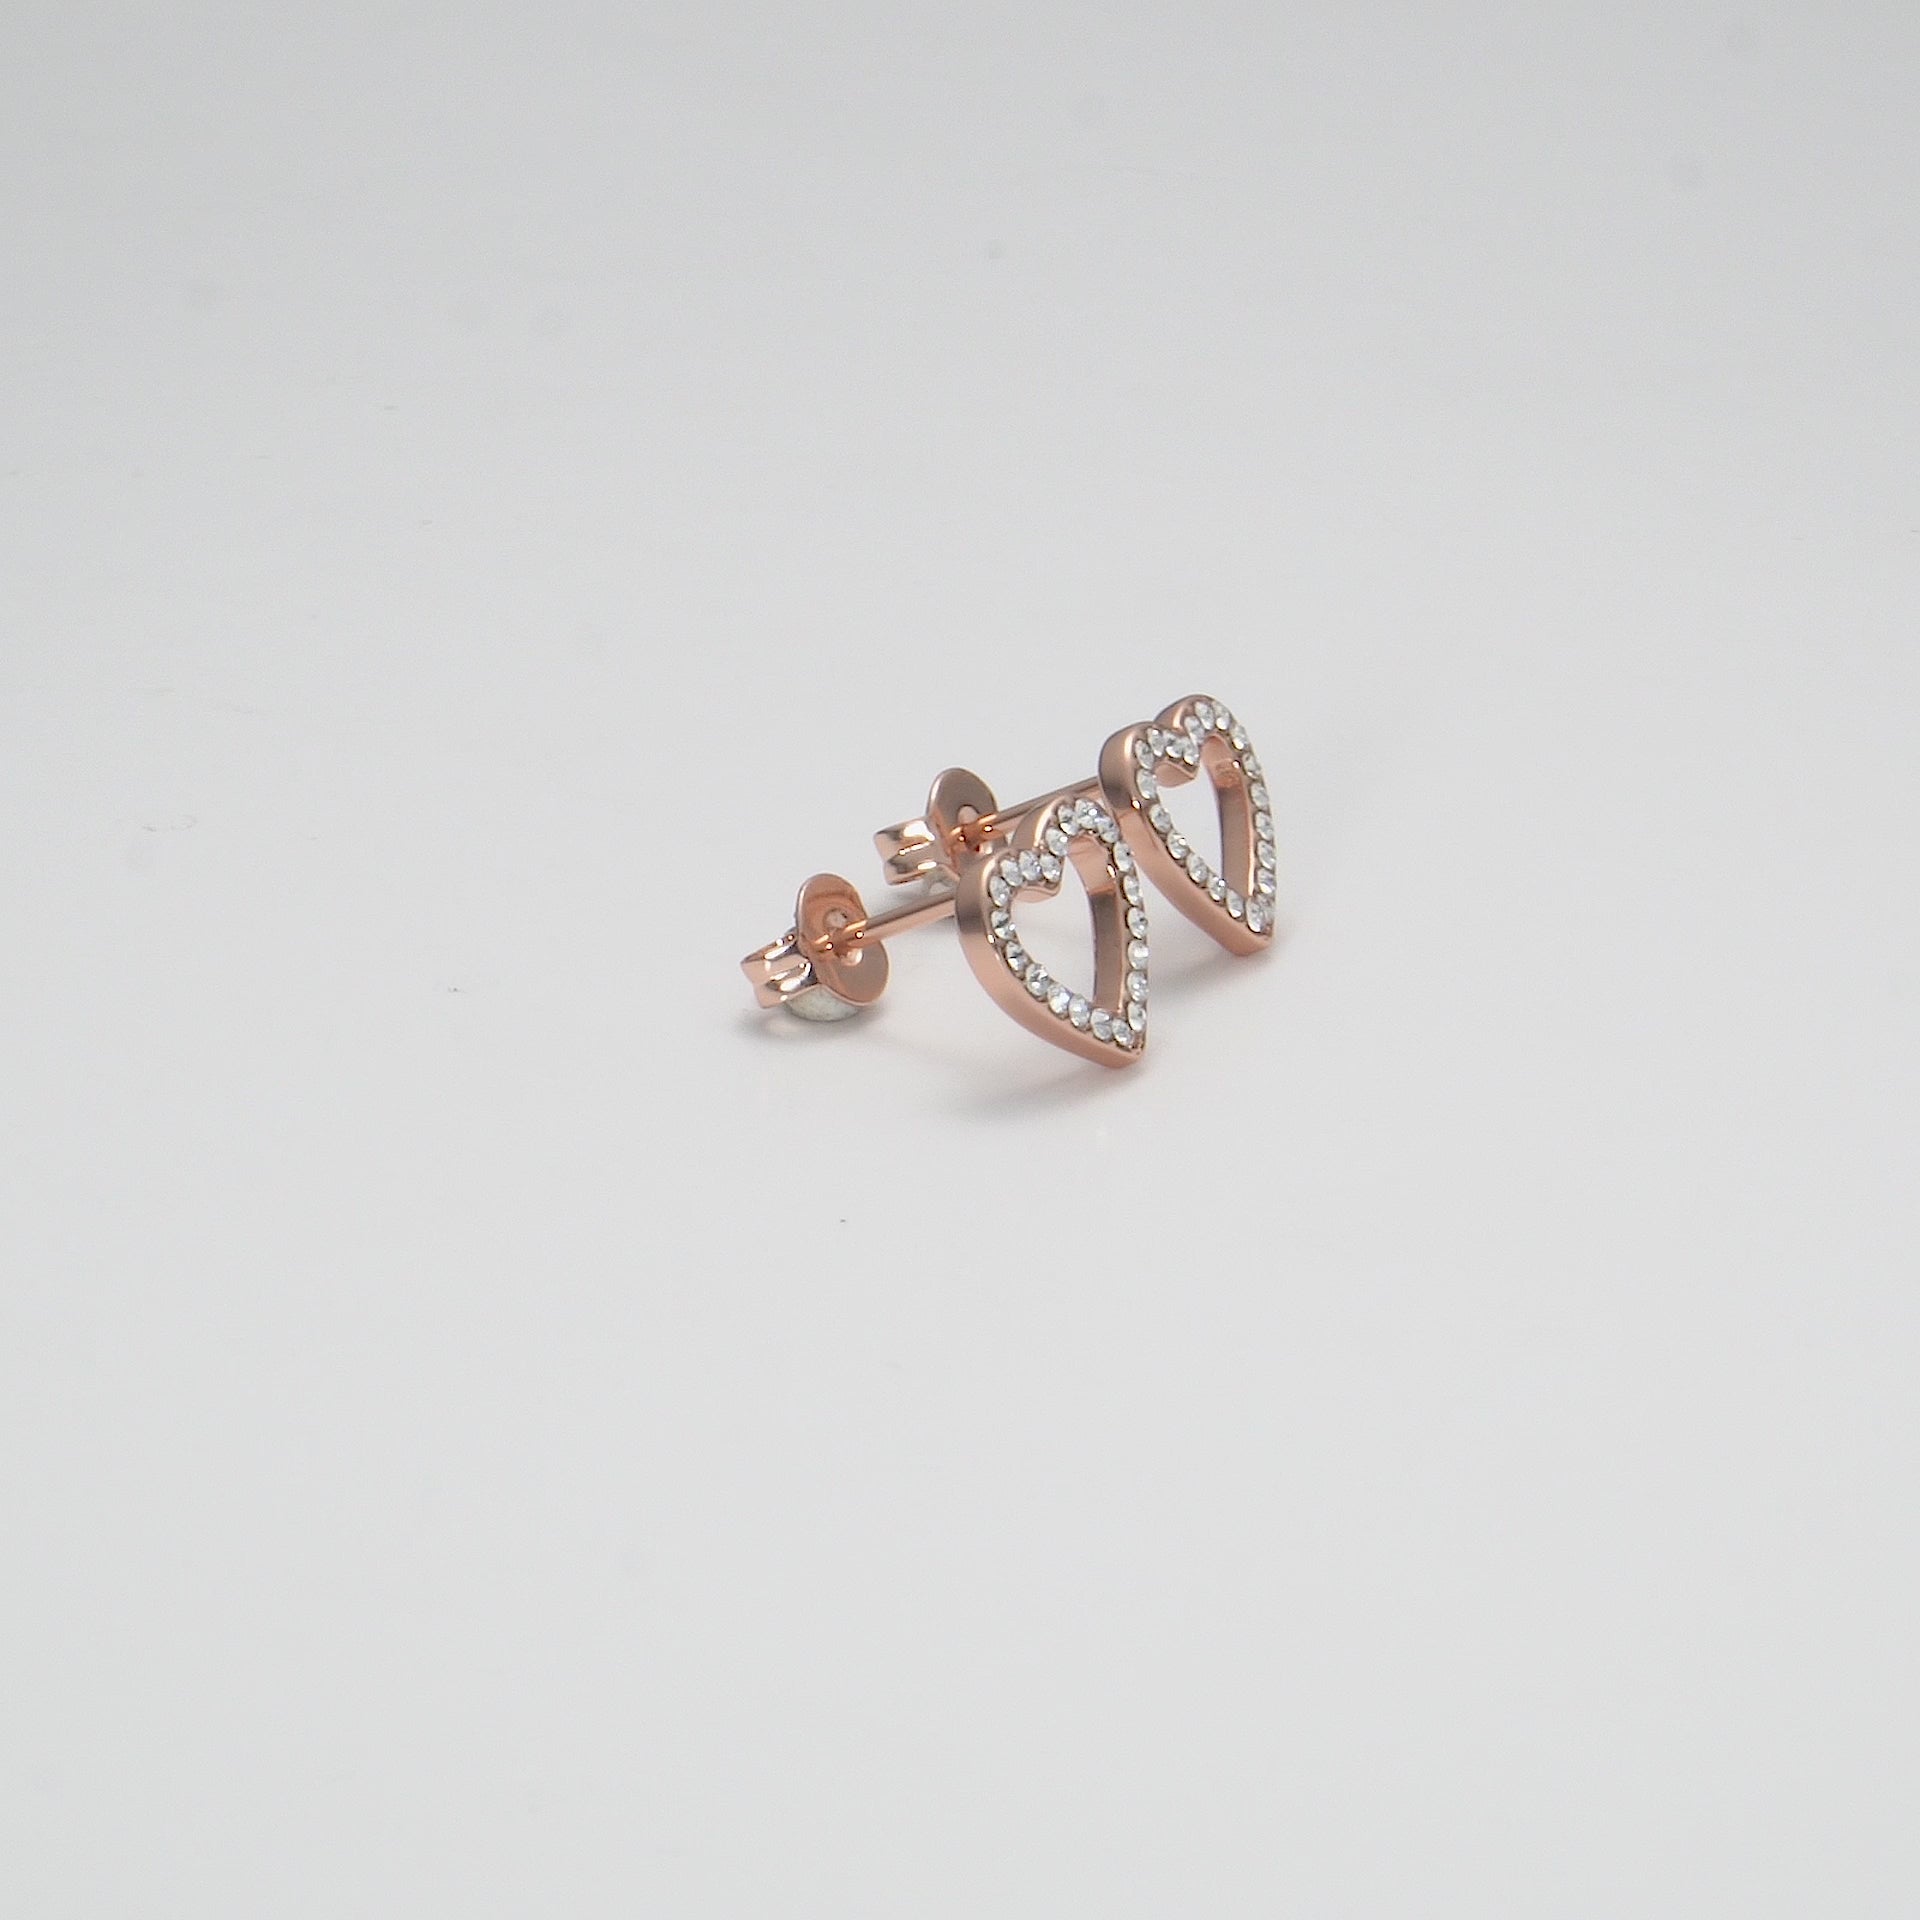 Rose Gold Plated Open Heart Earrings Created with Zircondia® Crystals